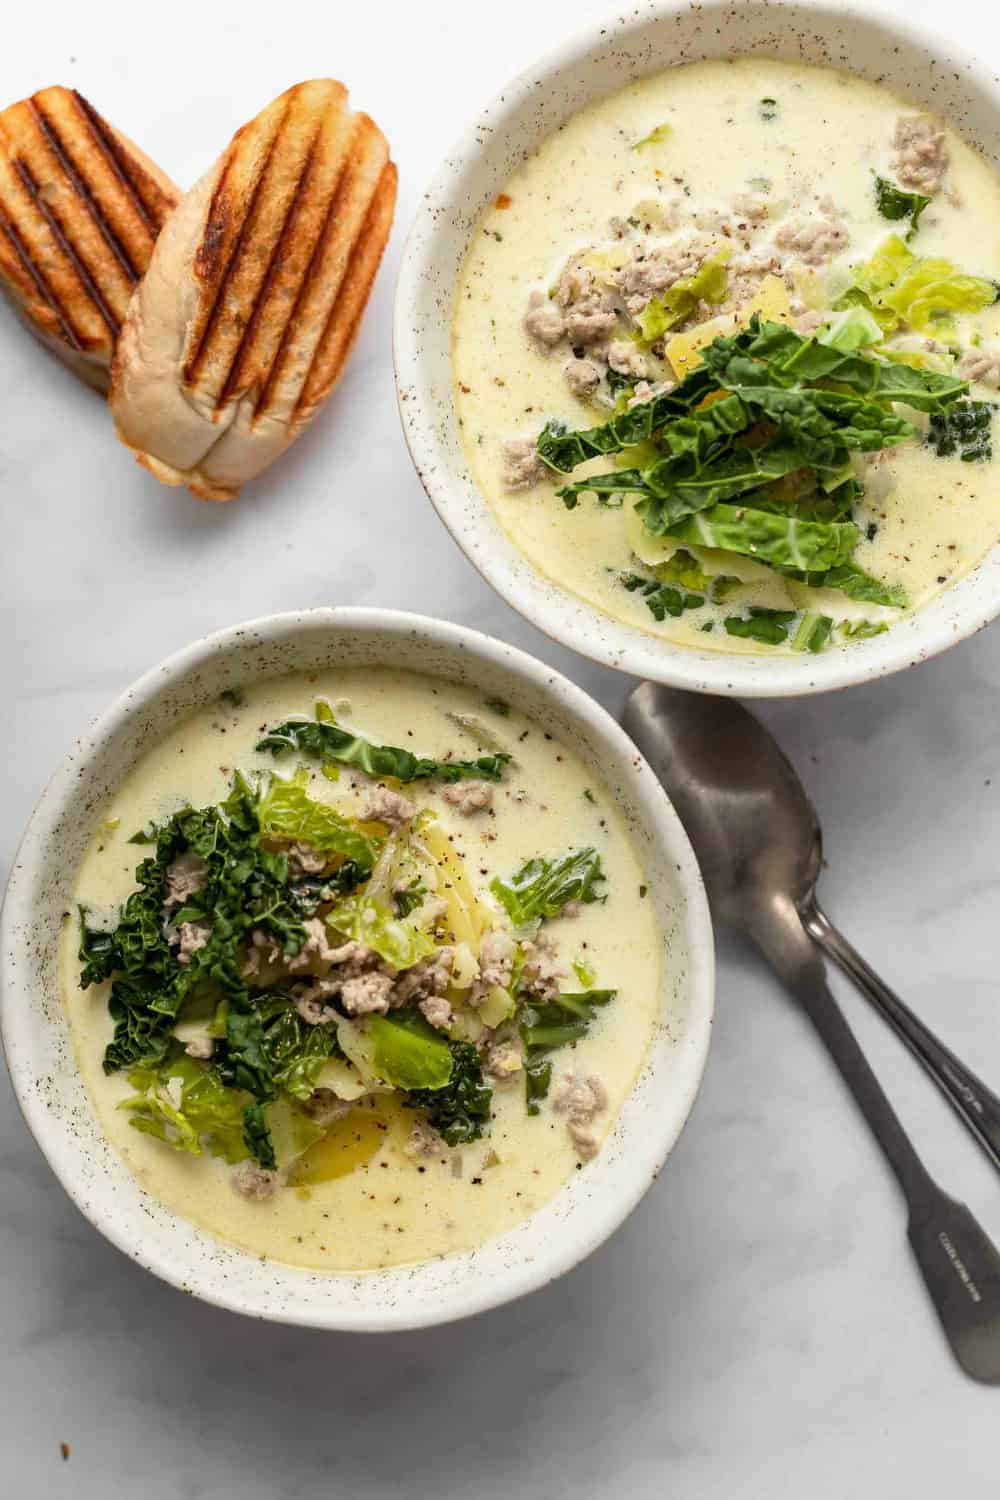 Two white bowls filled with zuppa toscana on a marble countertop next to grilled bread